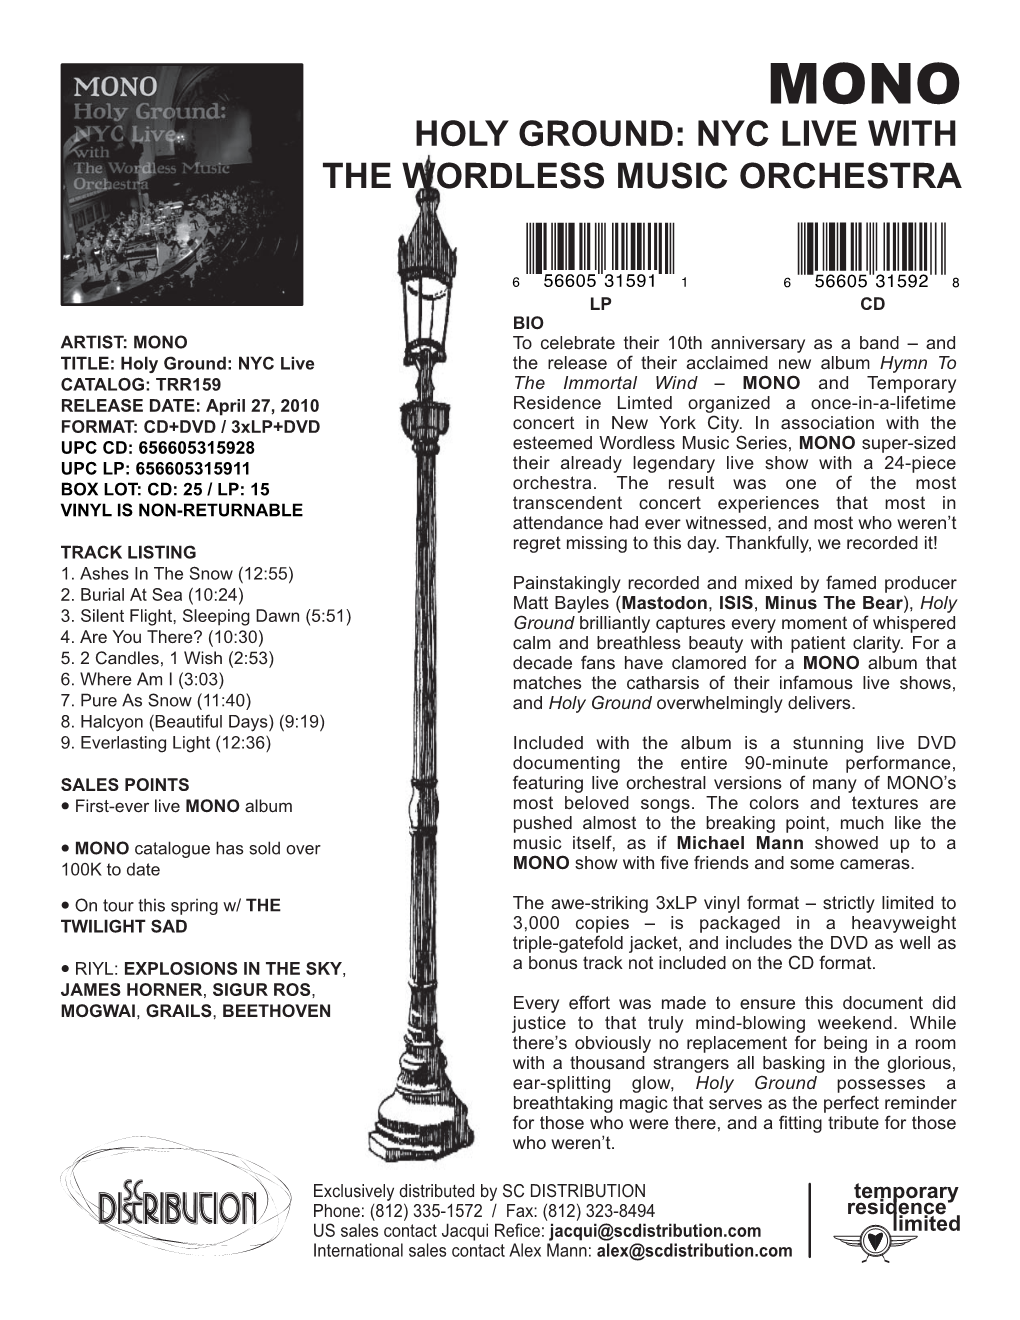 Holy Ground: Nyc Live with the Wordless Music Orchestra